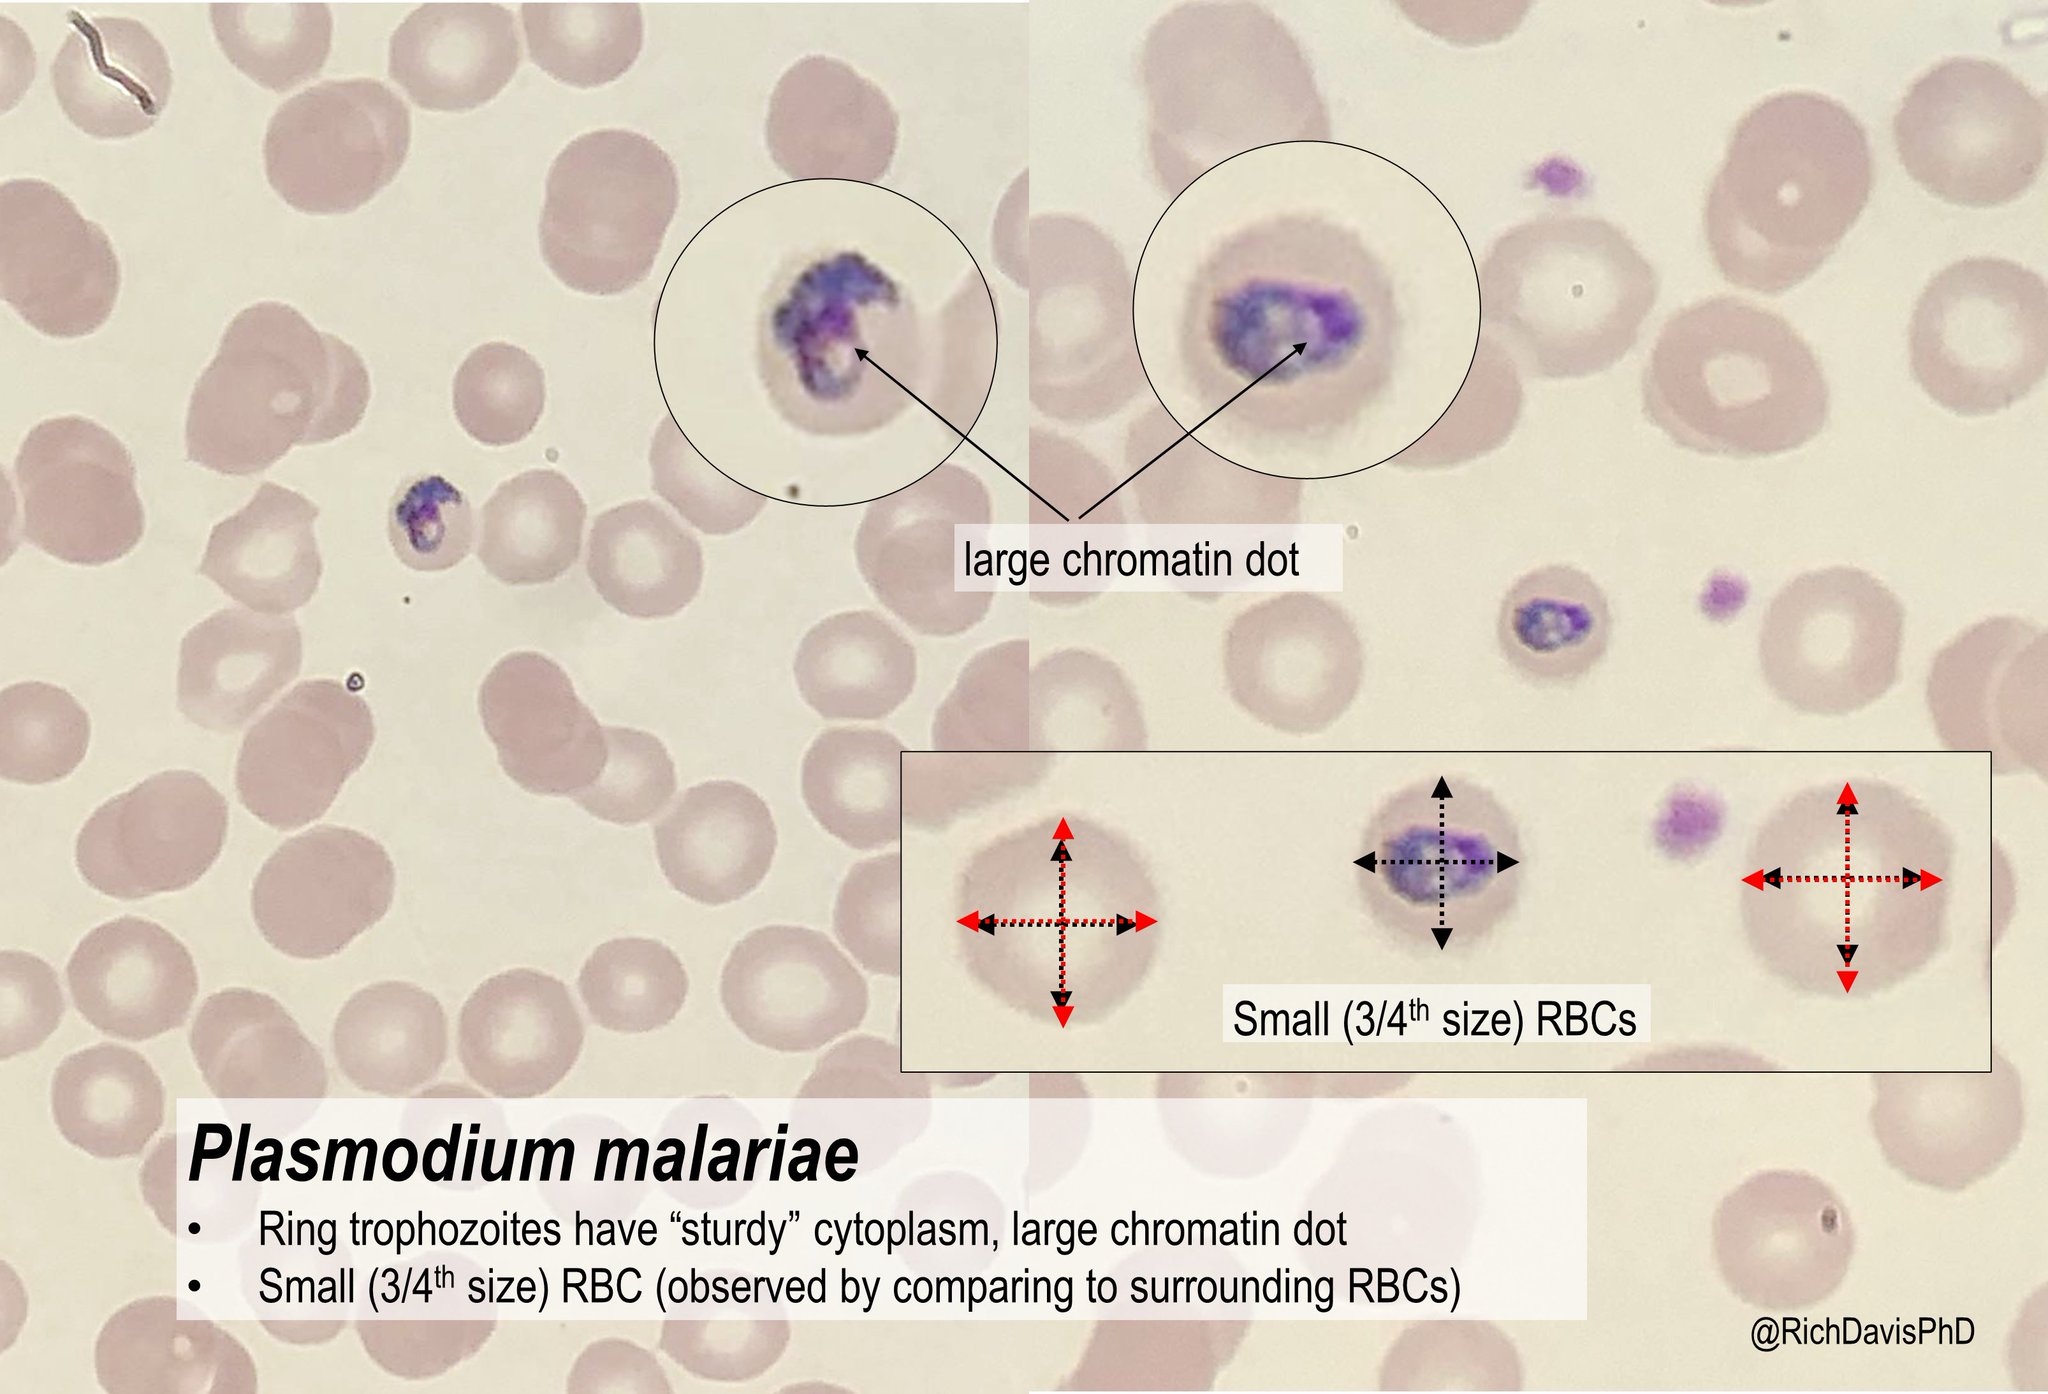 How to identify the type of malaria on a blood smear | Medmastery